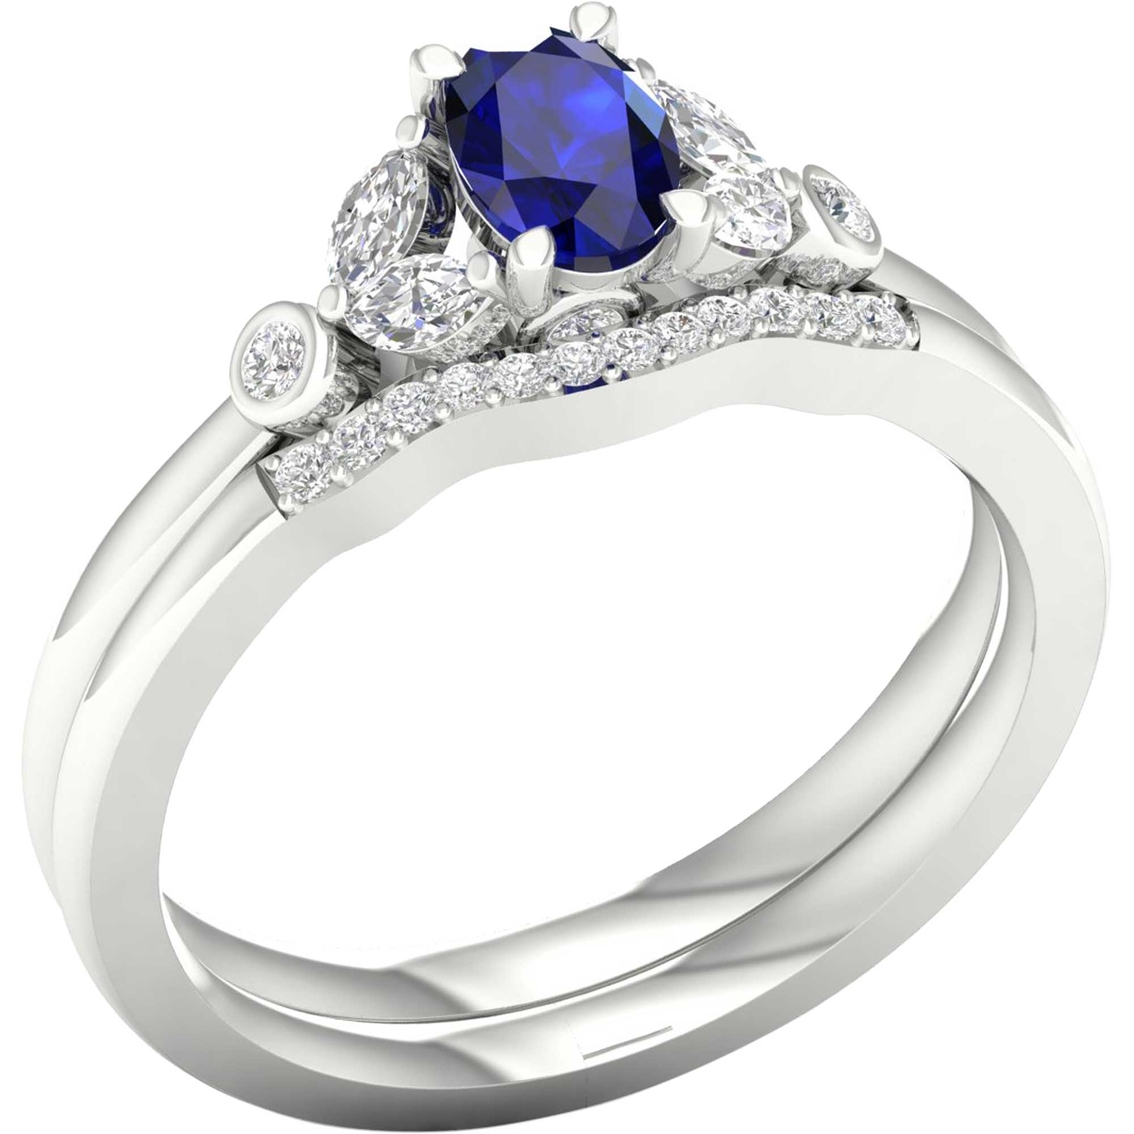 Color Bouquets by Lily 10K White Gold 1/5 CTW Diamond and Blue Sapphire Bridal Set - Image 2 of 4